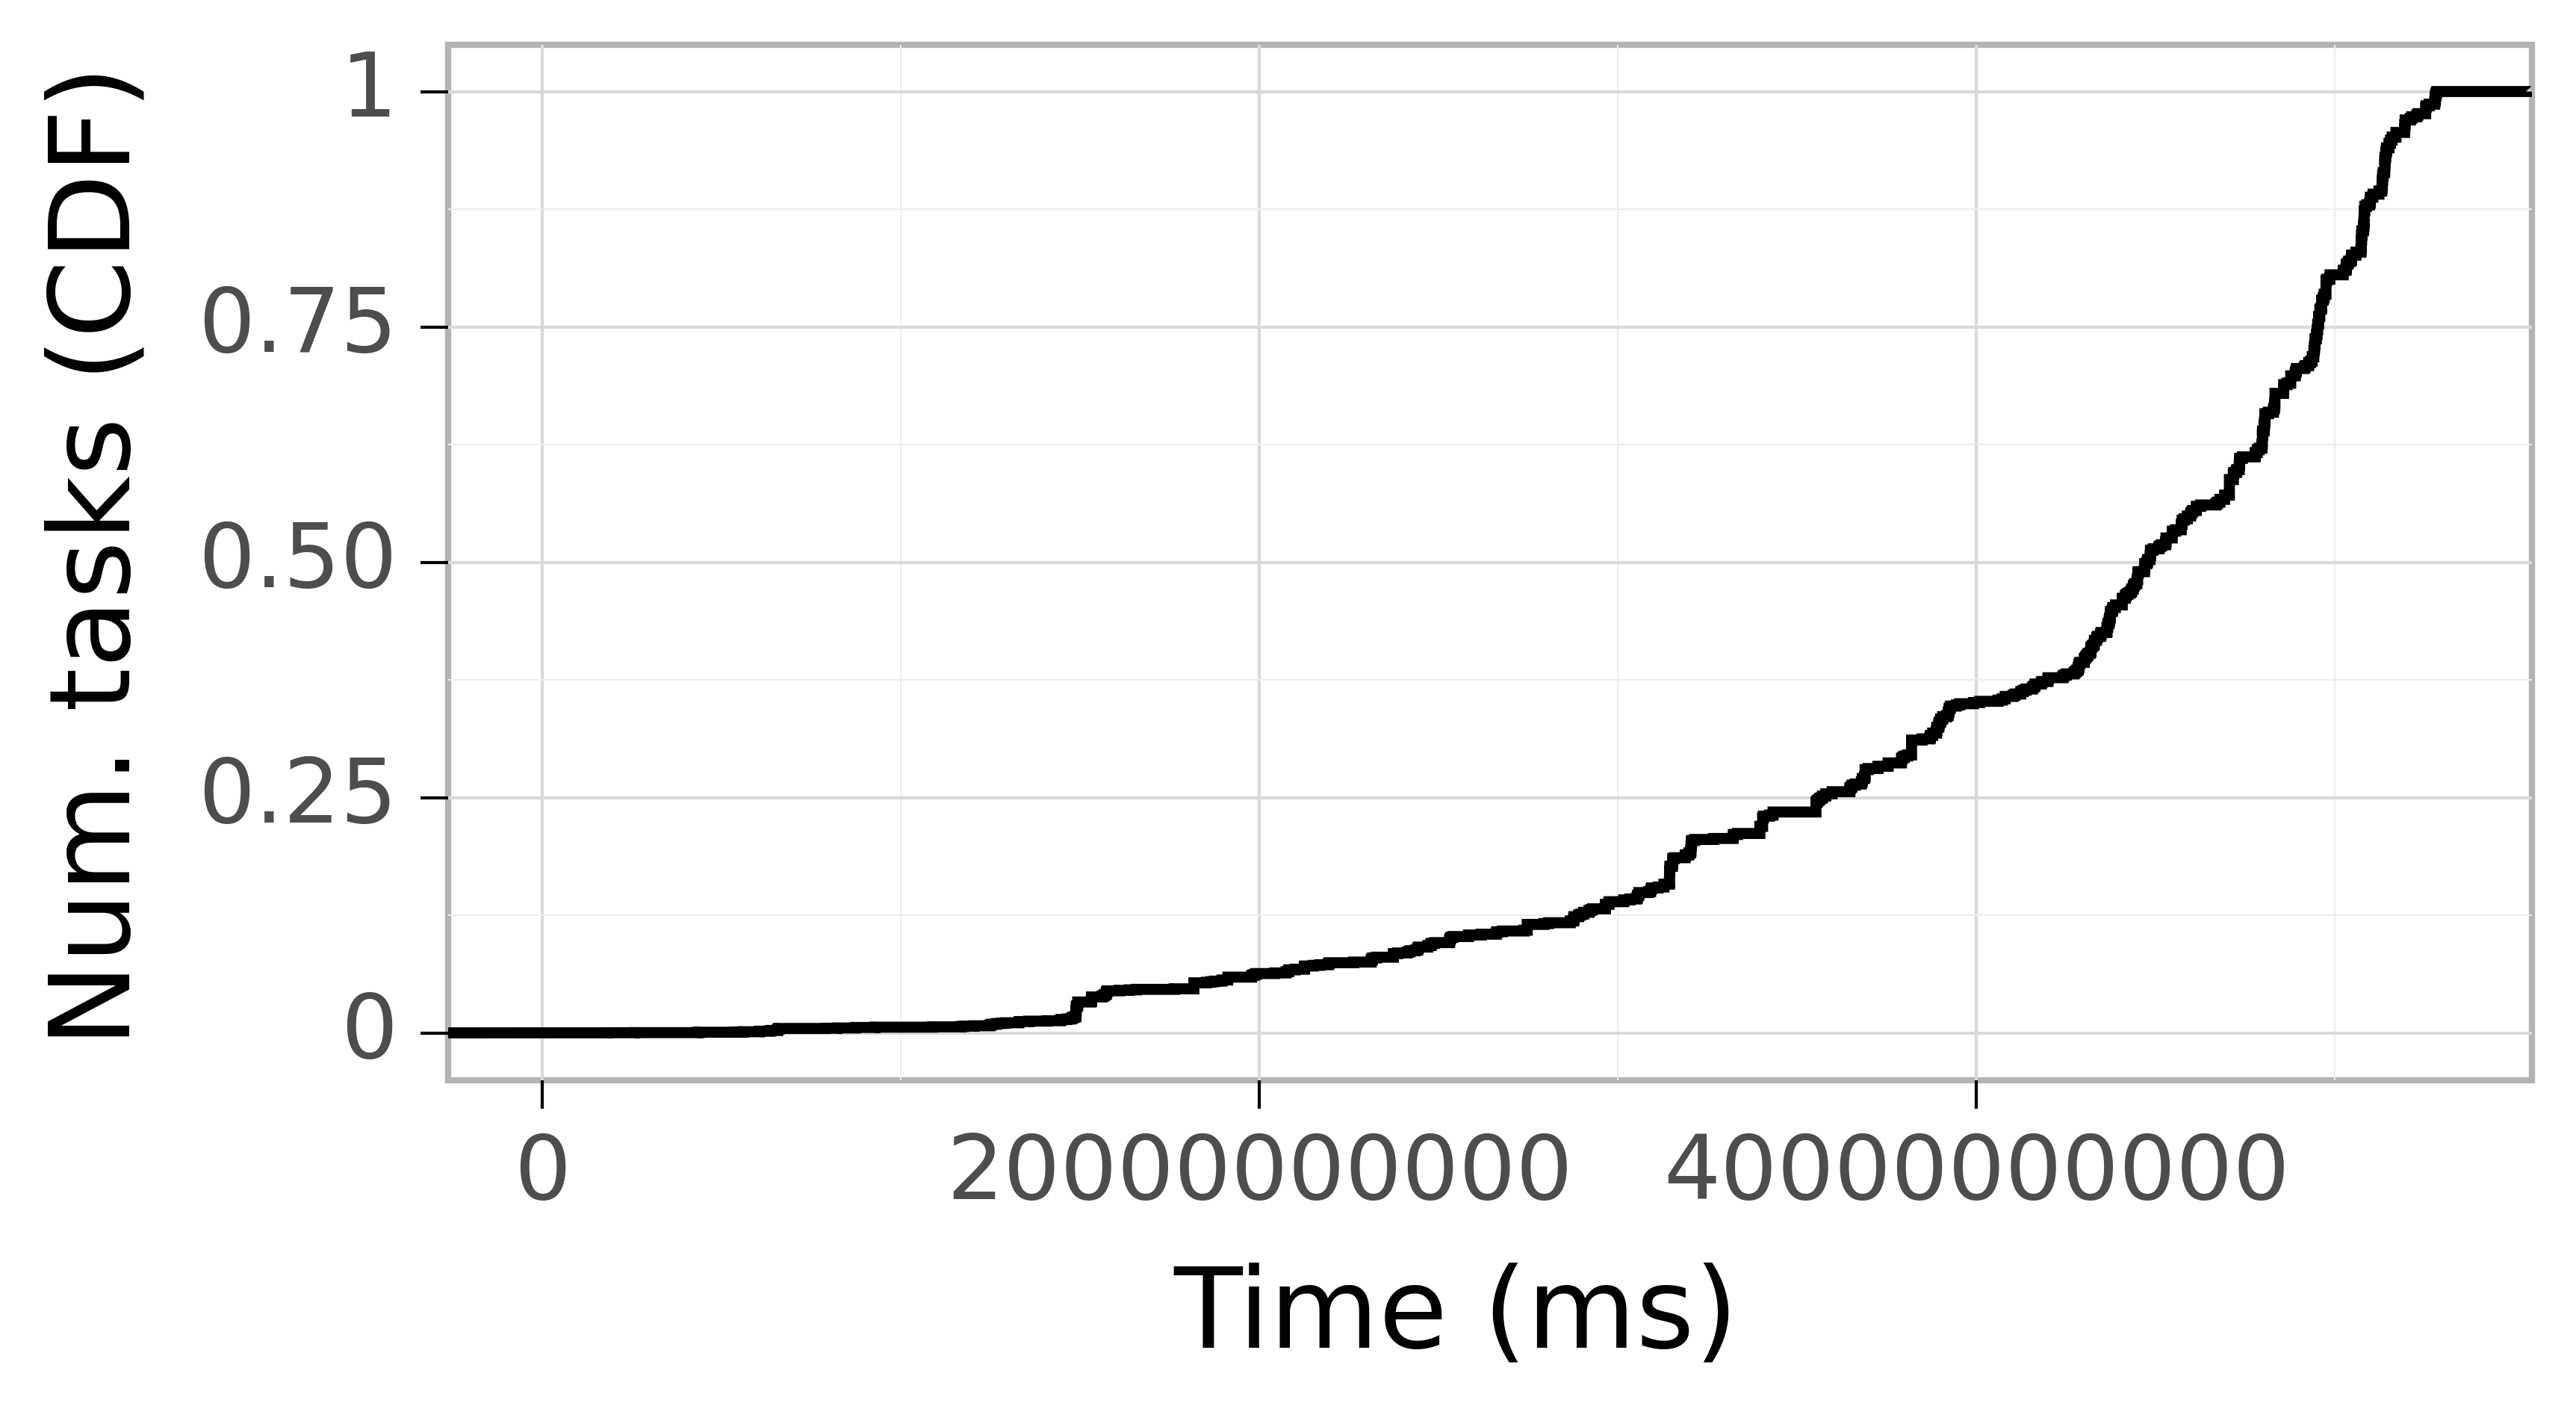 Task arrival CDF graph for the Galaxy trace.